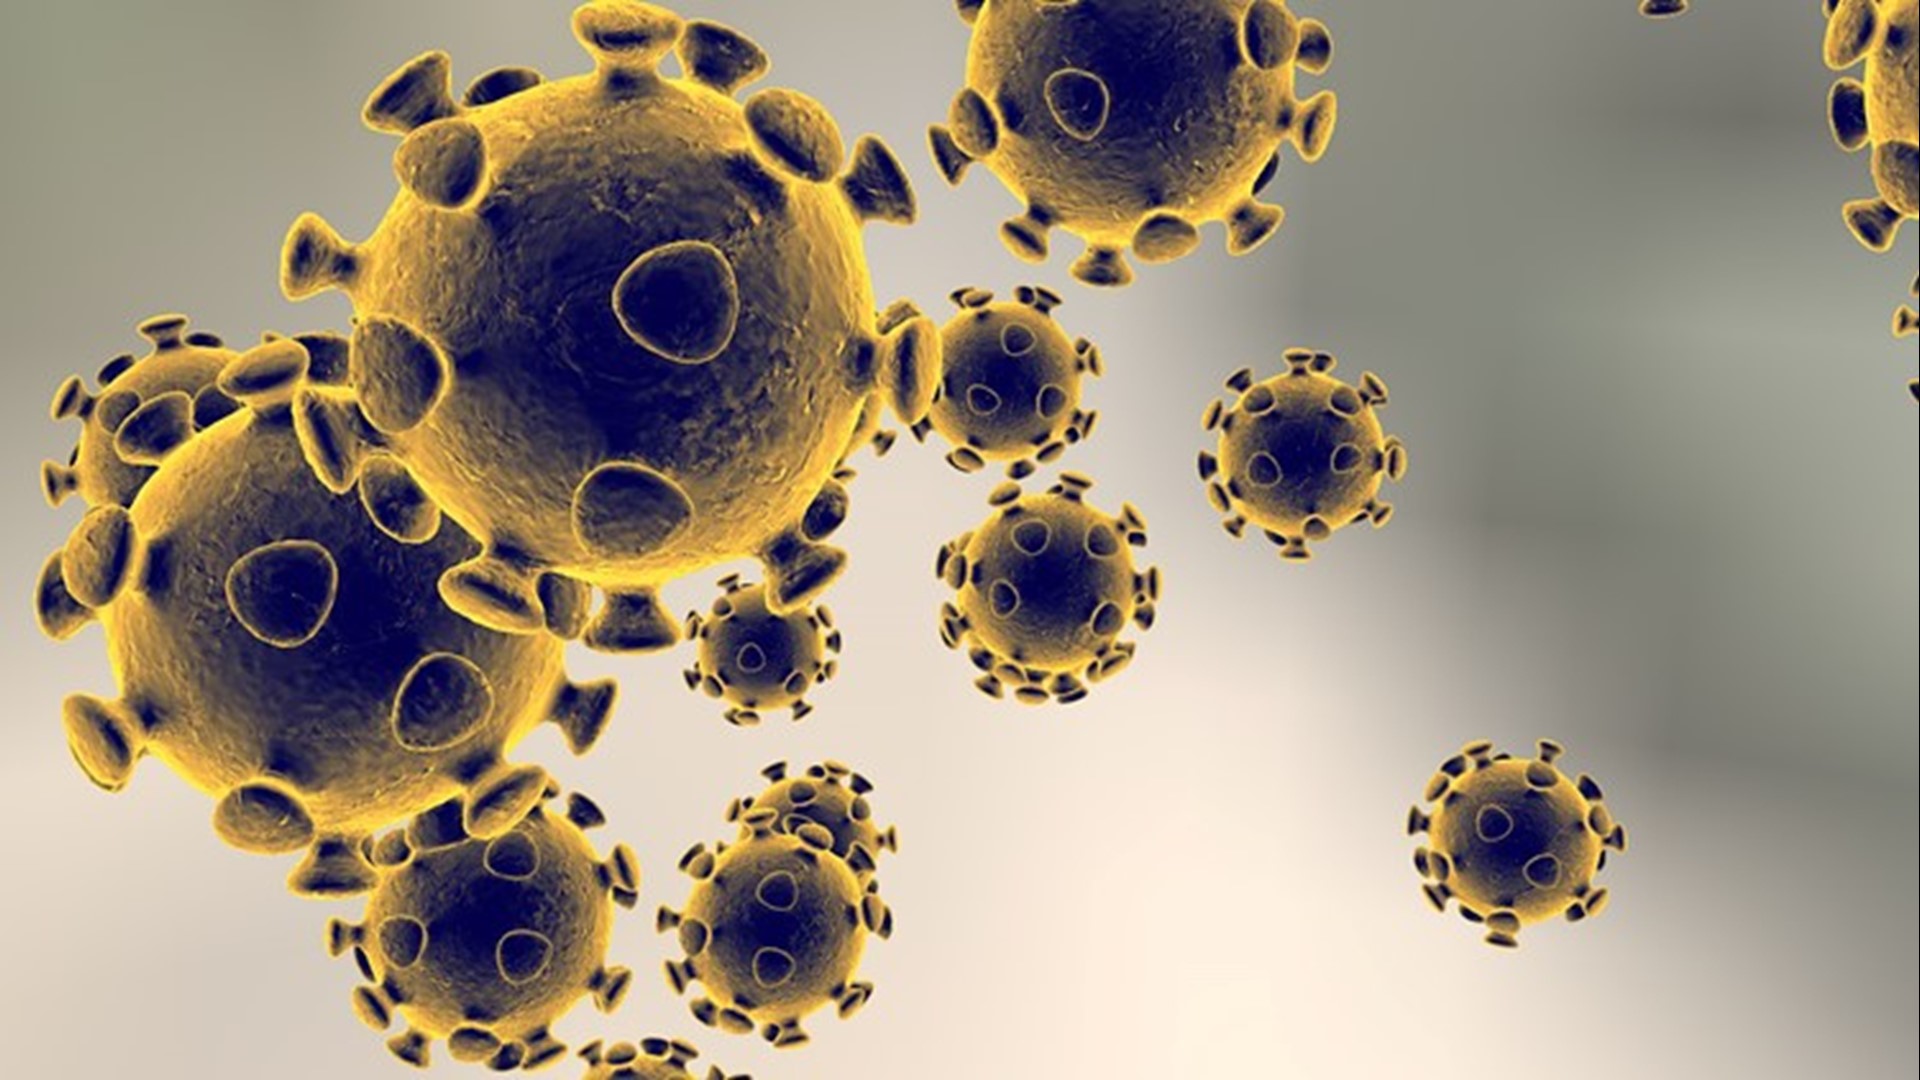 The Brazos County Health District is investigating a suspected case of the 2019 novel coronavirus in a patient who traveled from Wuhan, China, where the coronavirus